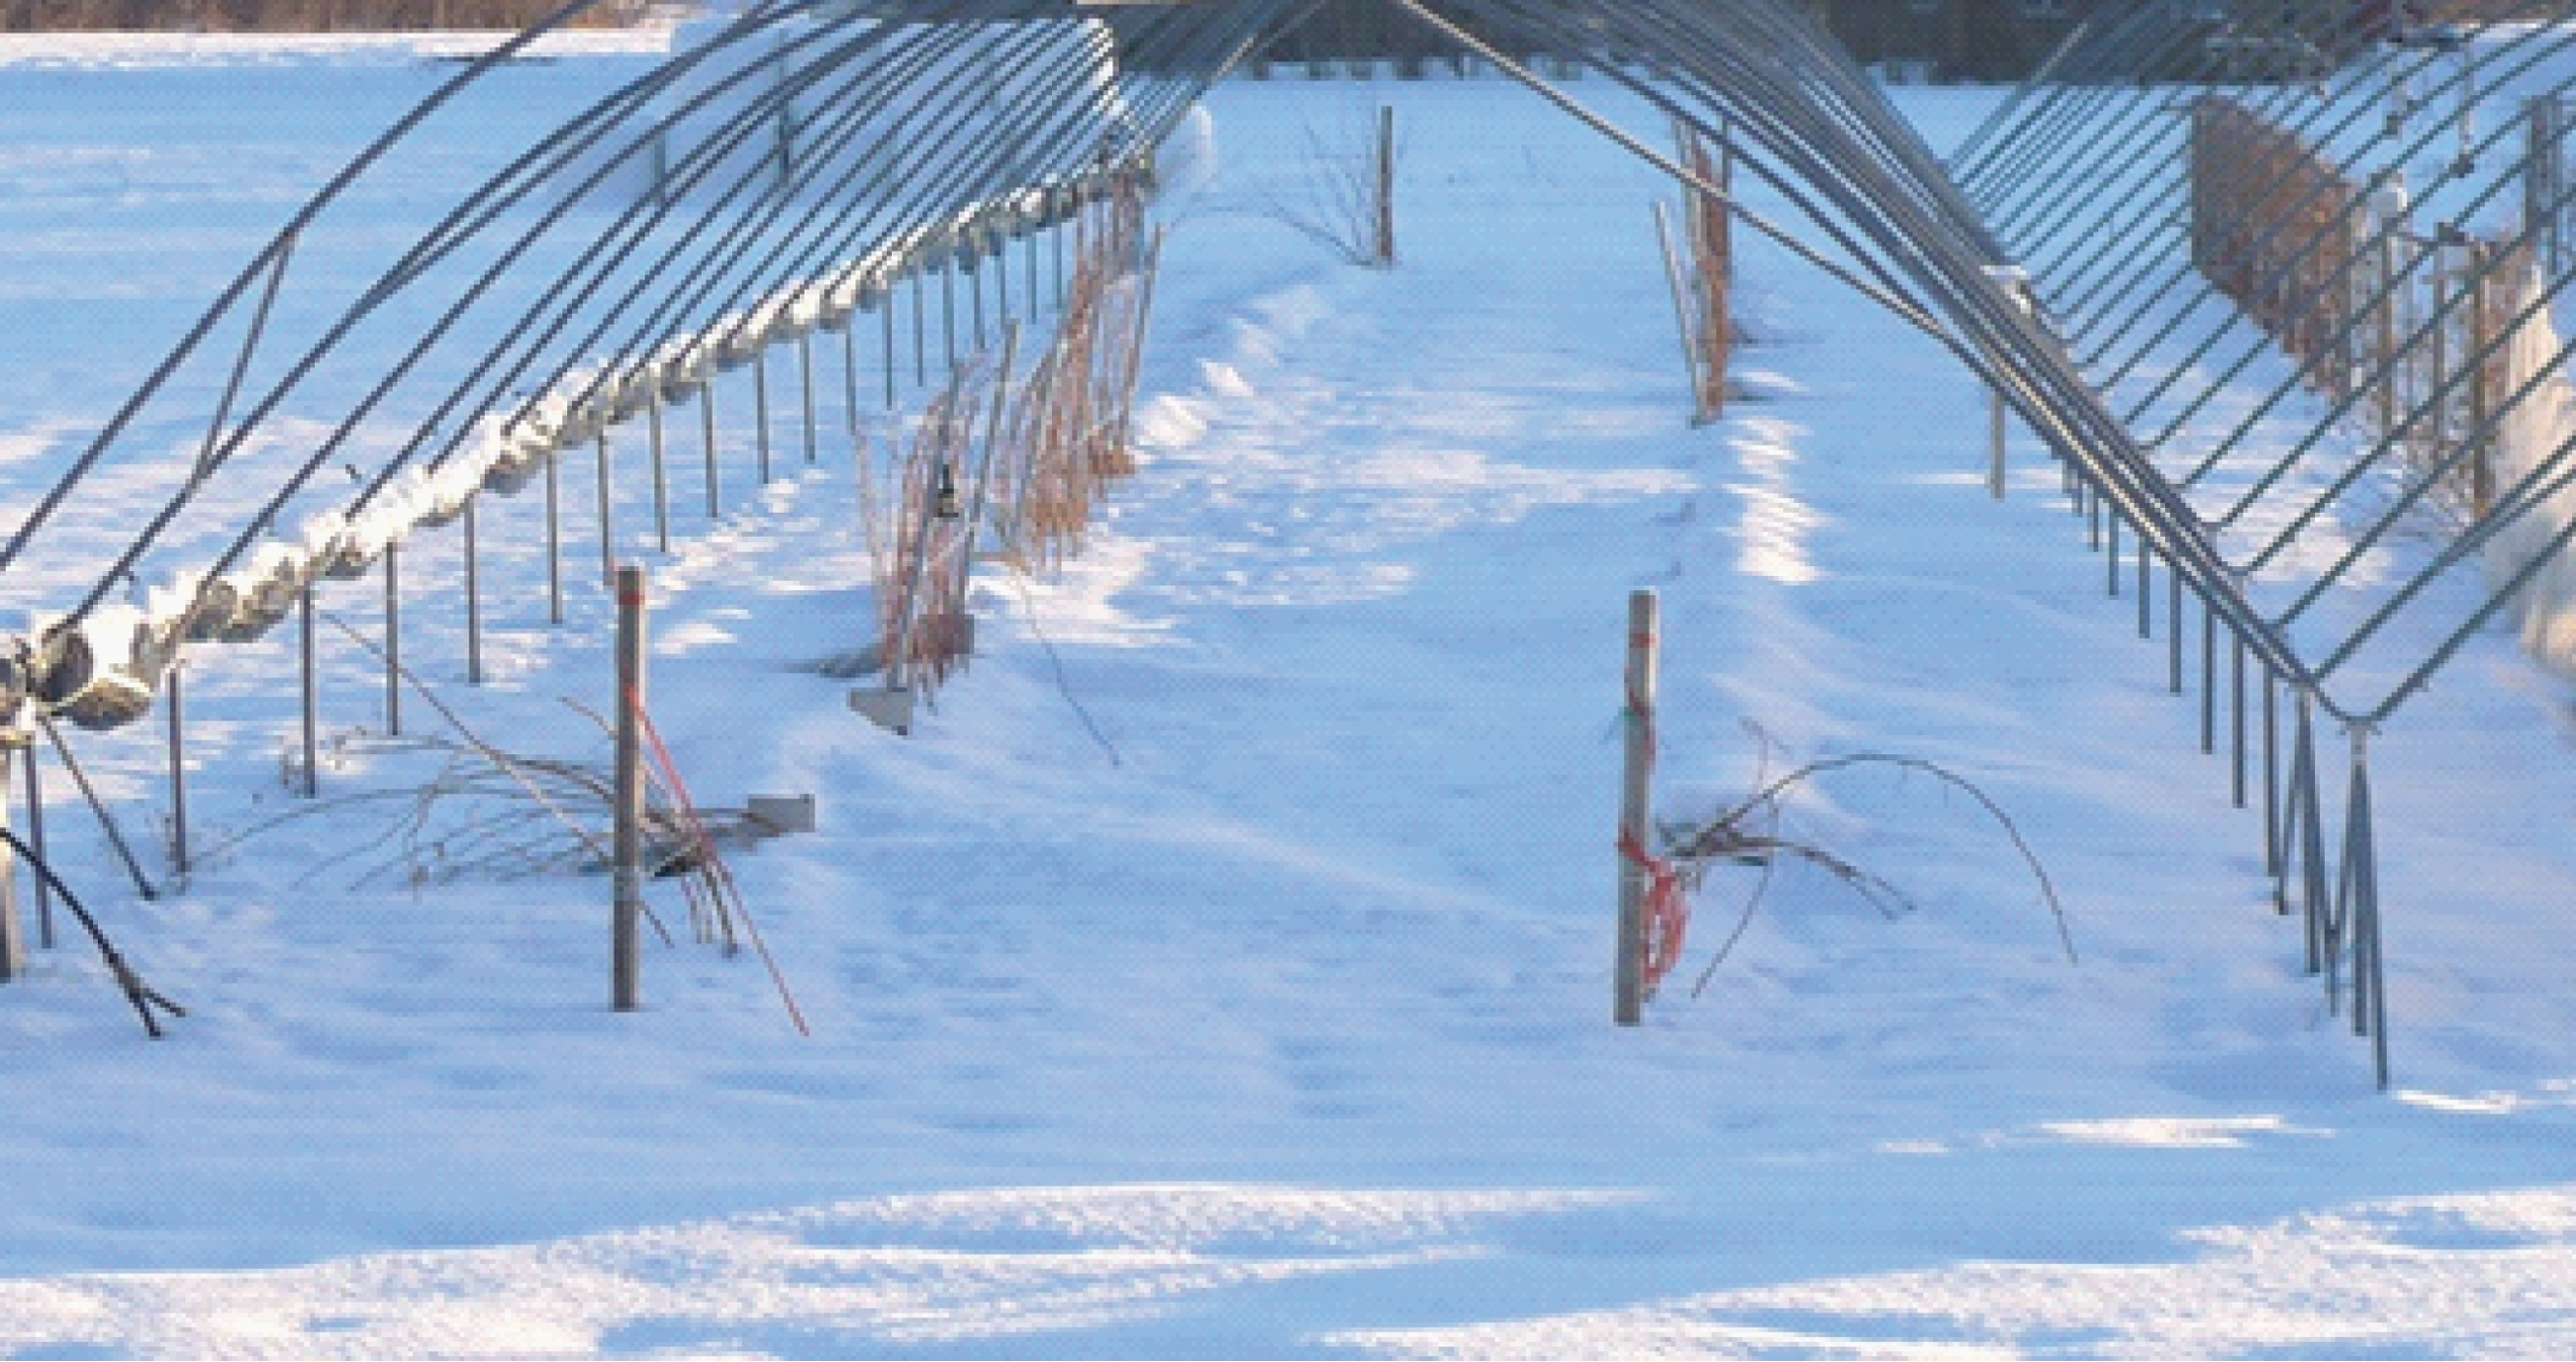 The experimental field in winter with canes in bent plots covered with snow and canes in control plots in upright orientation.